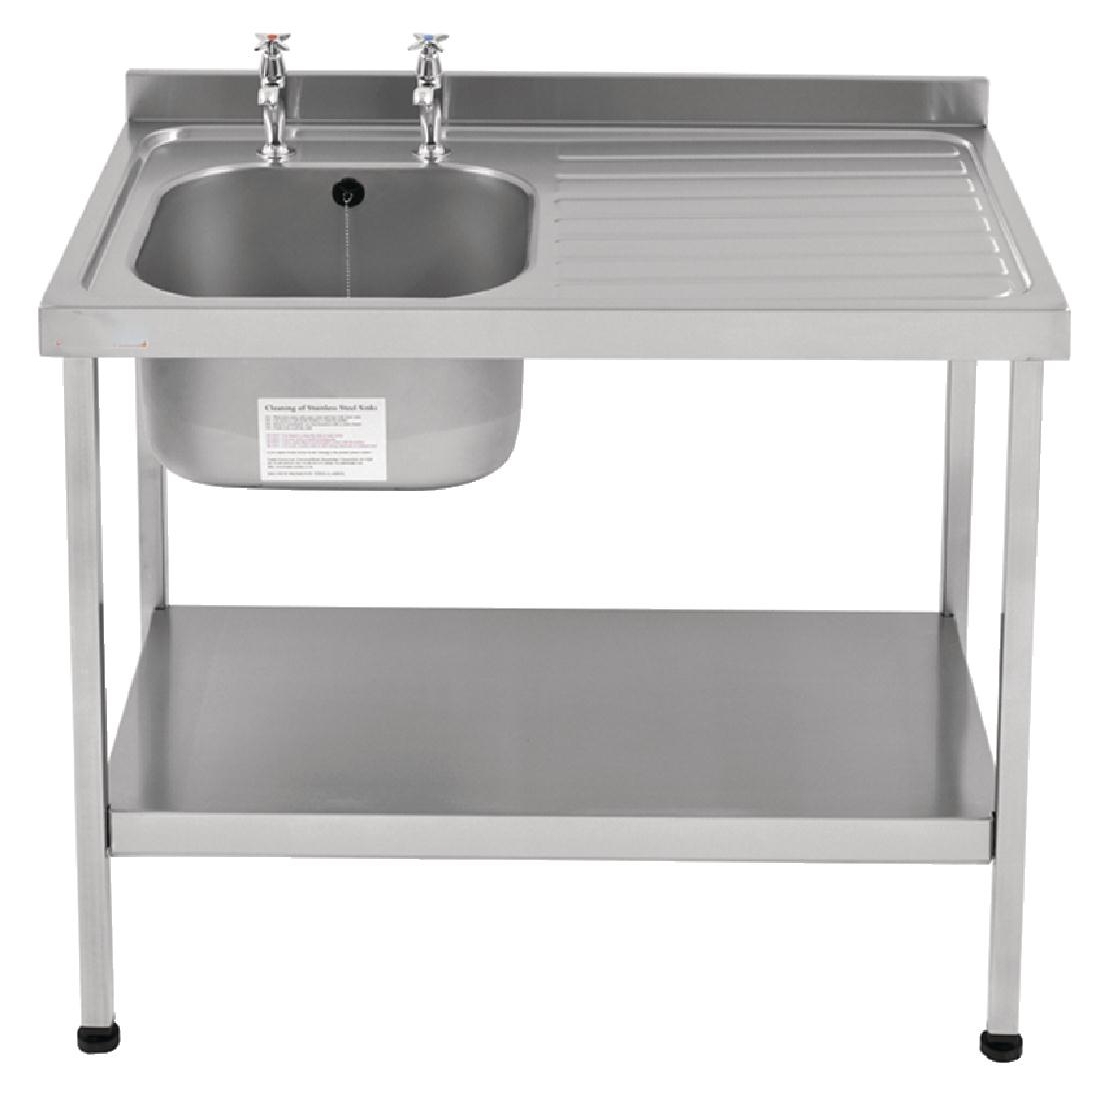 Franke Sissons Self Assembly Stainless Steel Sink Right Hand Drainer 1200x600mm